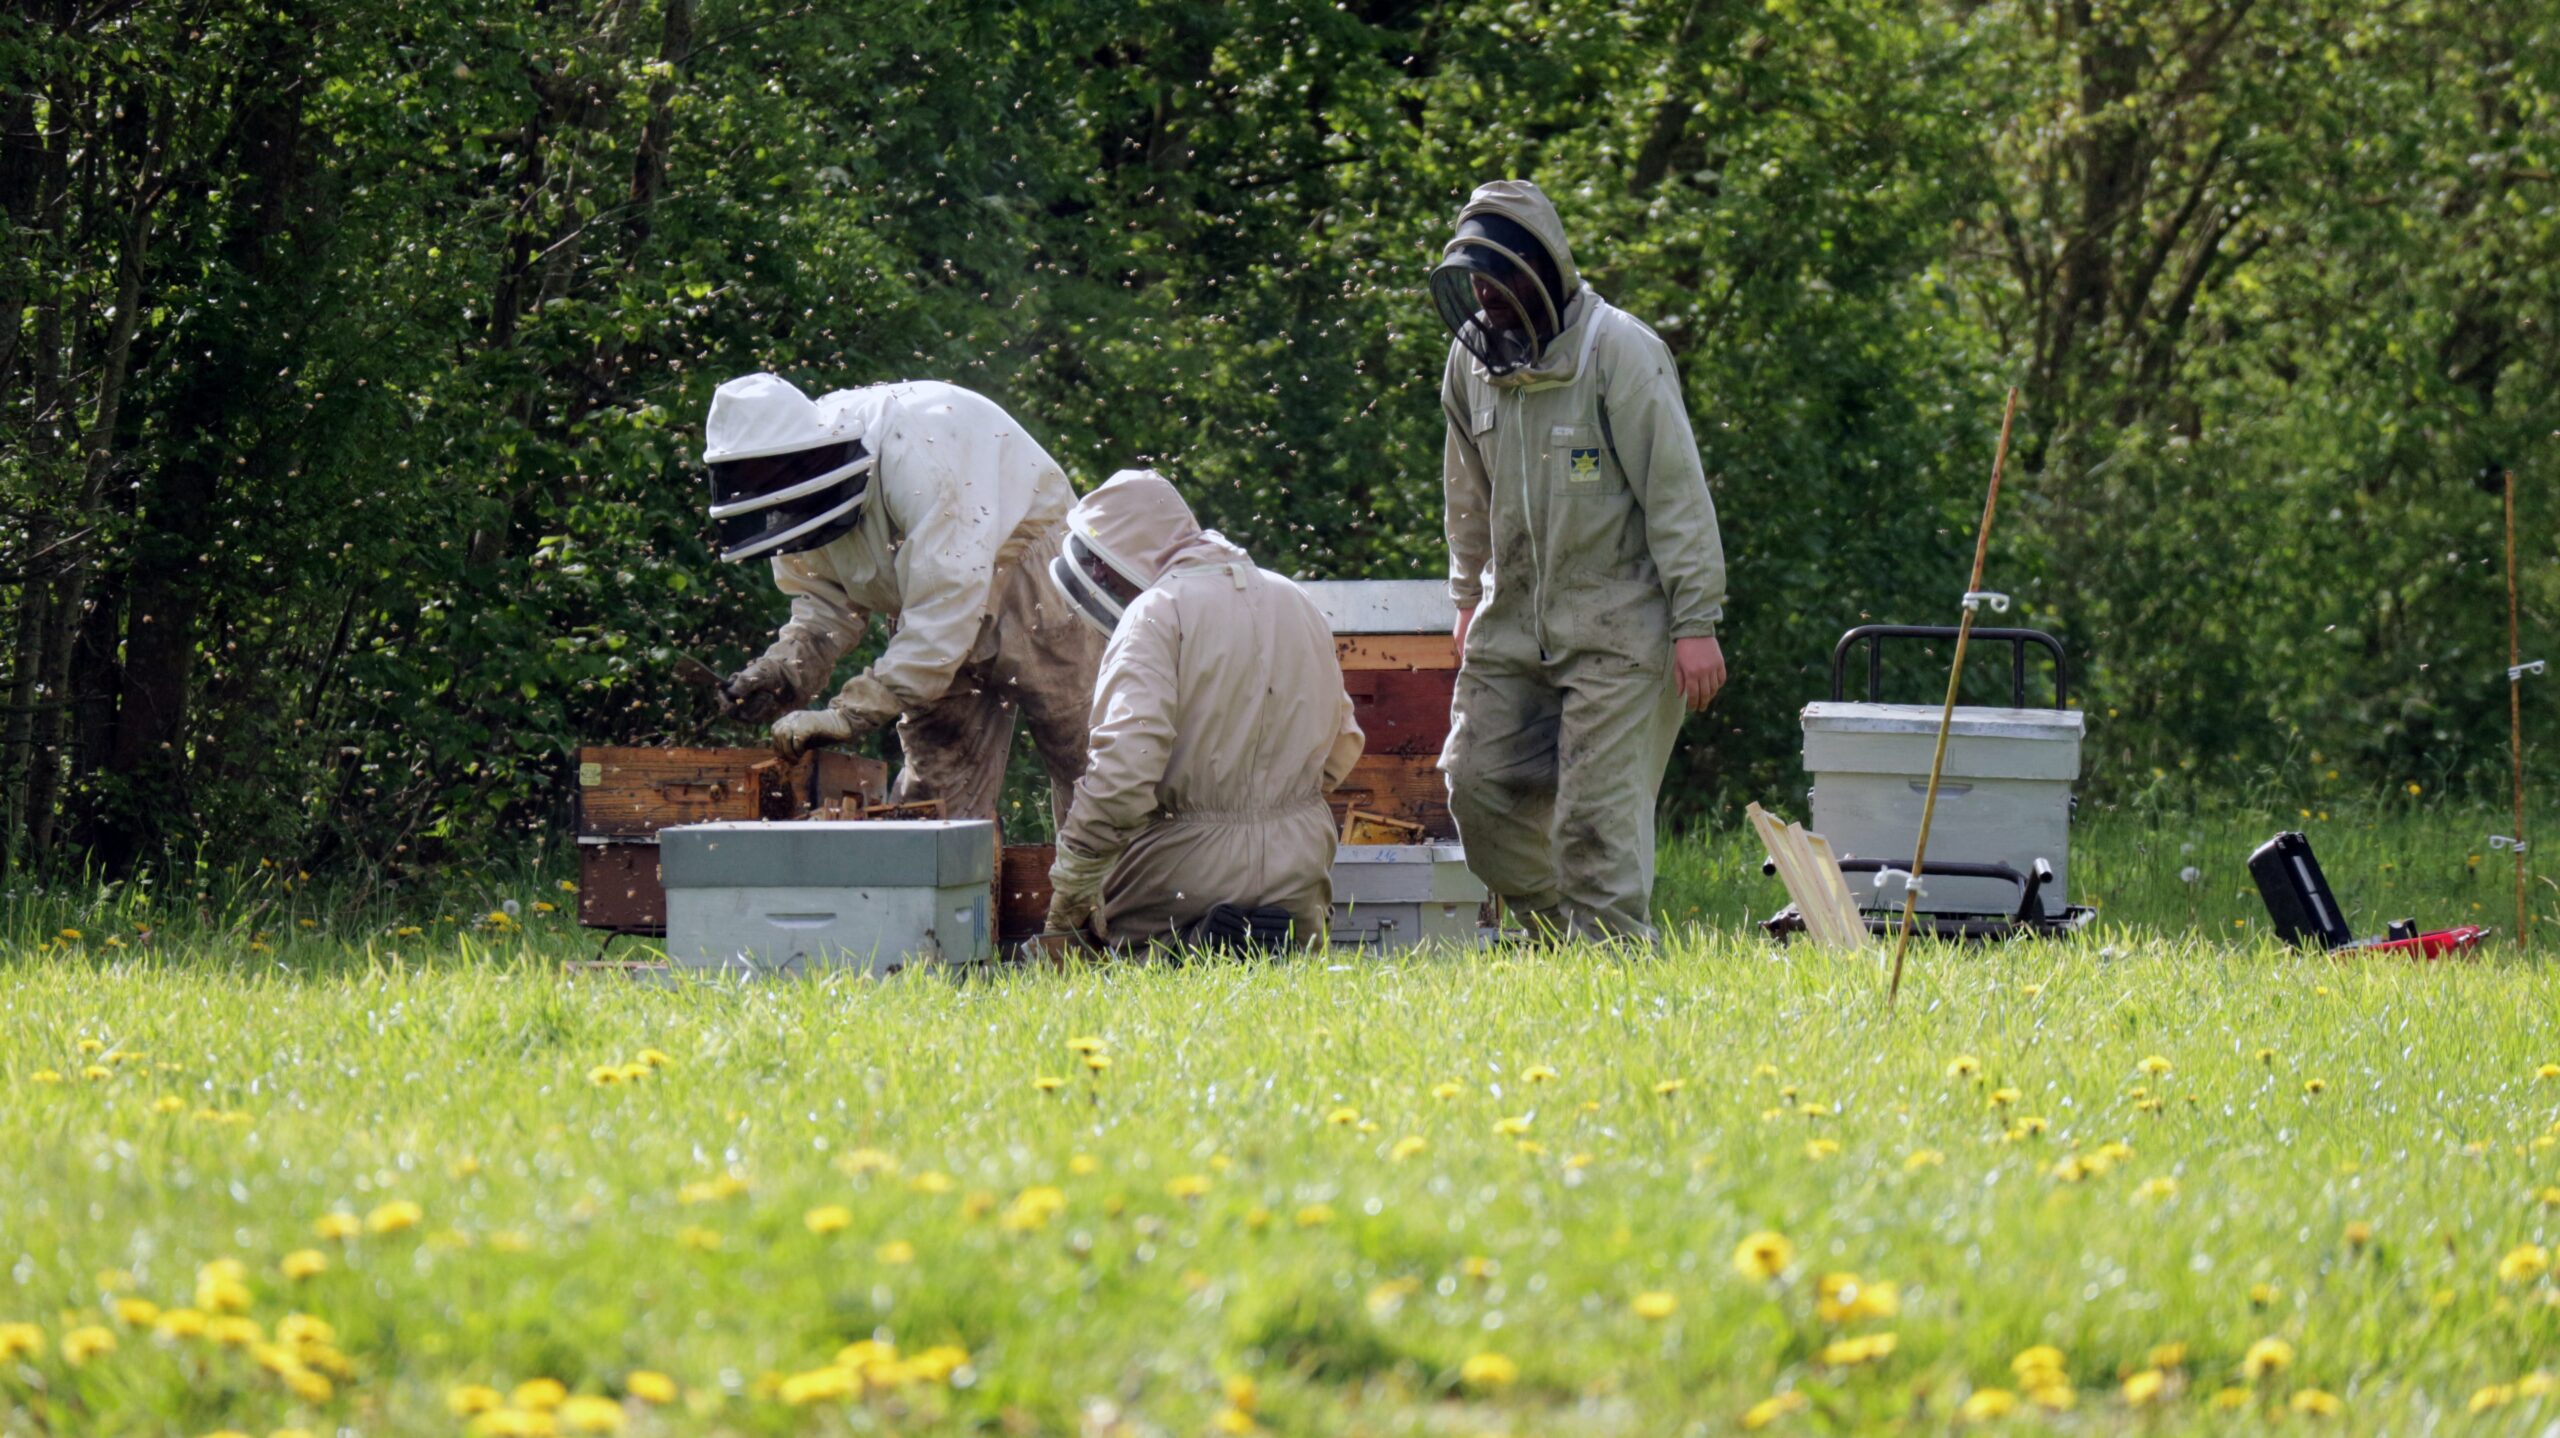 Hives Management in the UK